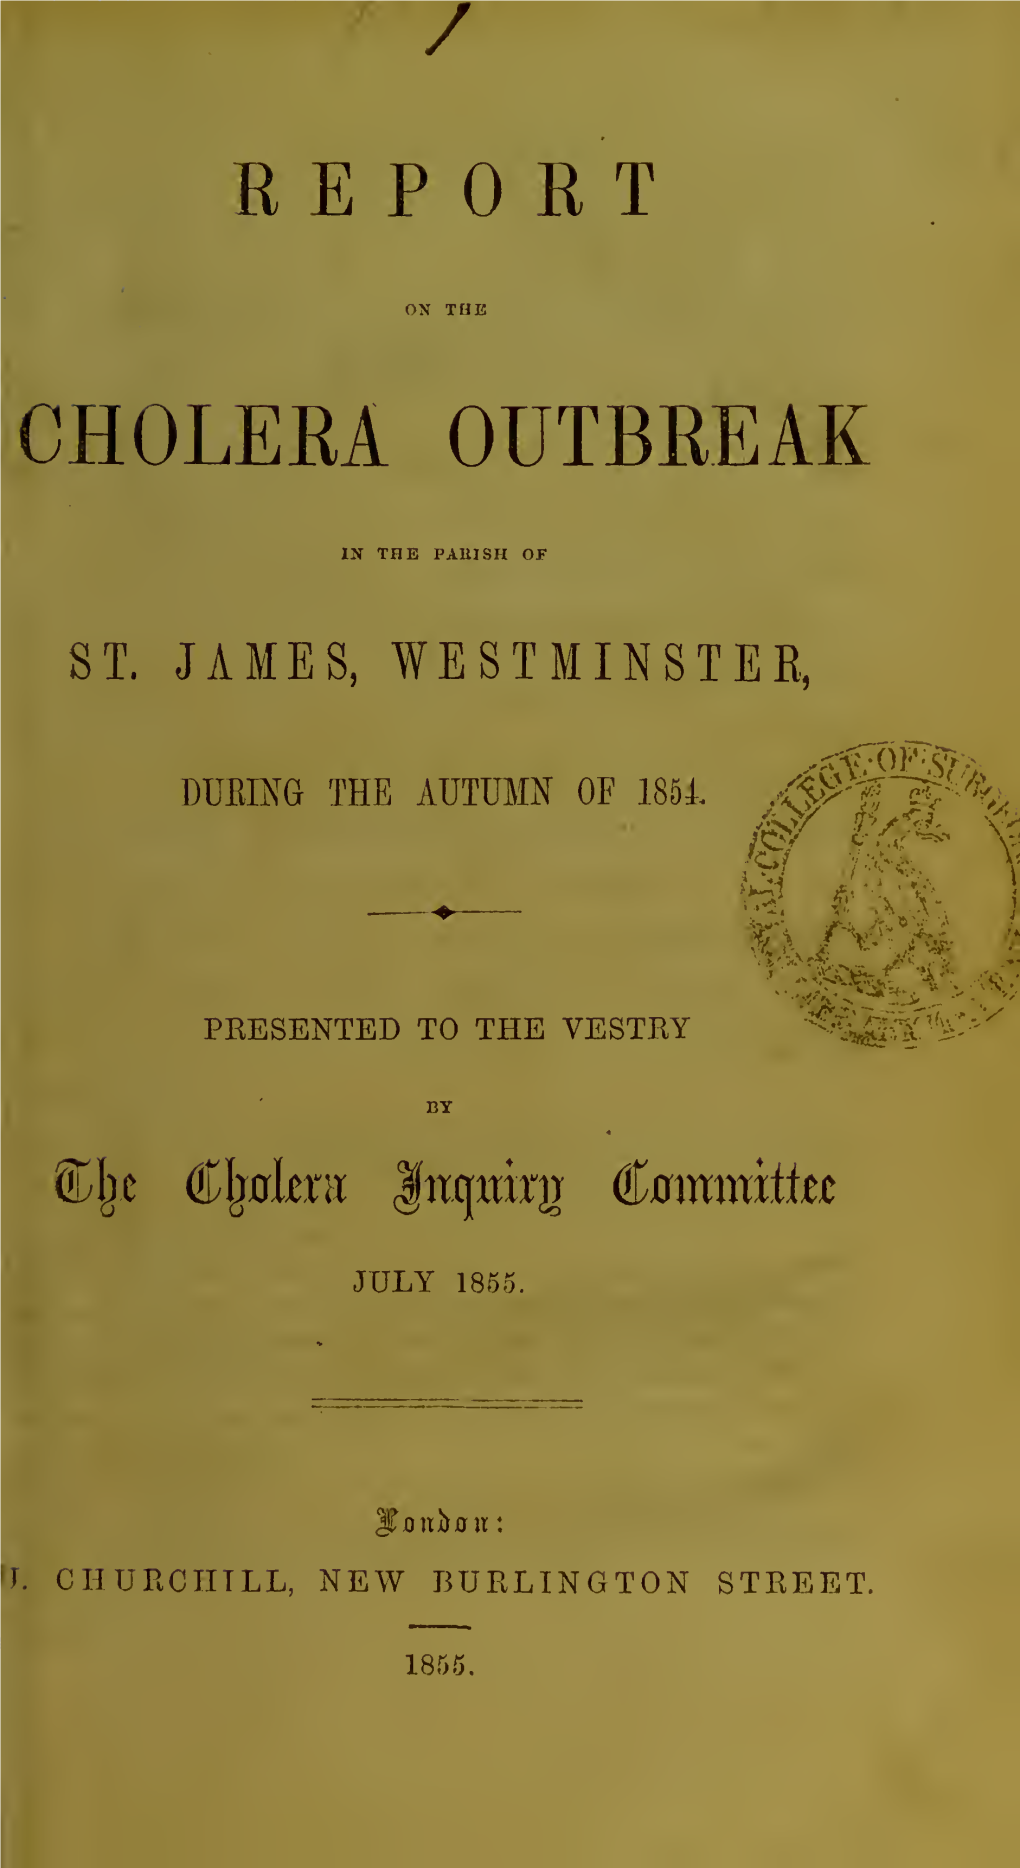 Report on the Cholera Outbreak in the Parish of St. James, Westminster